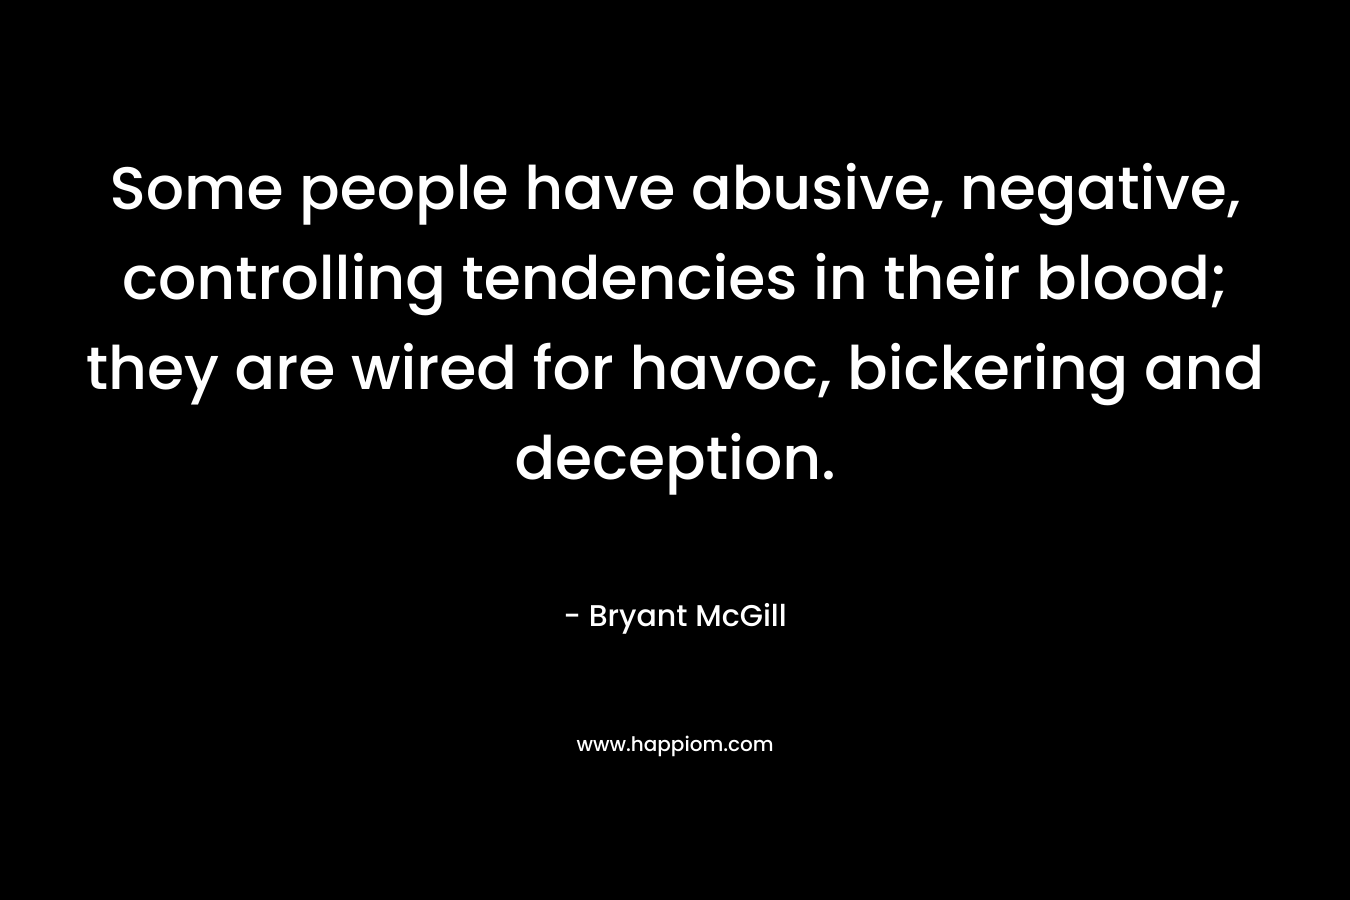 Some people have abusive, negative, controlling tendencies in their blood; they are wired for havoc, bickering and deception. – Bryant McGill